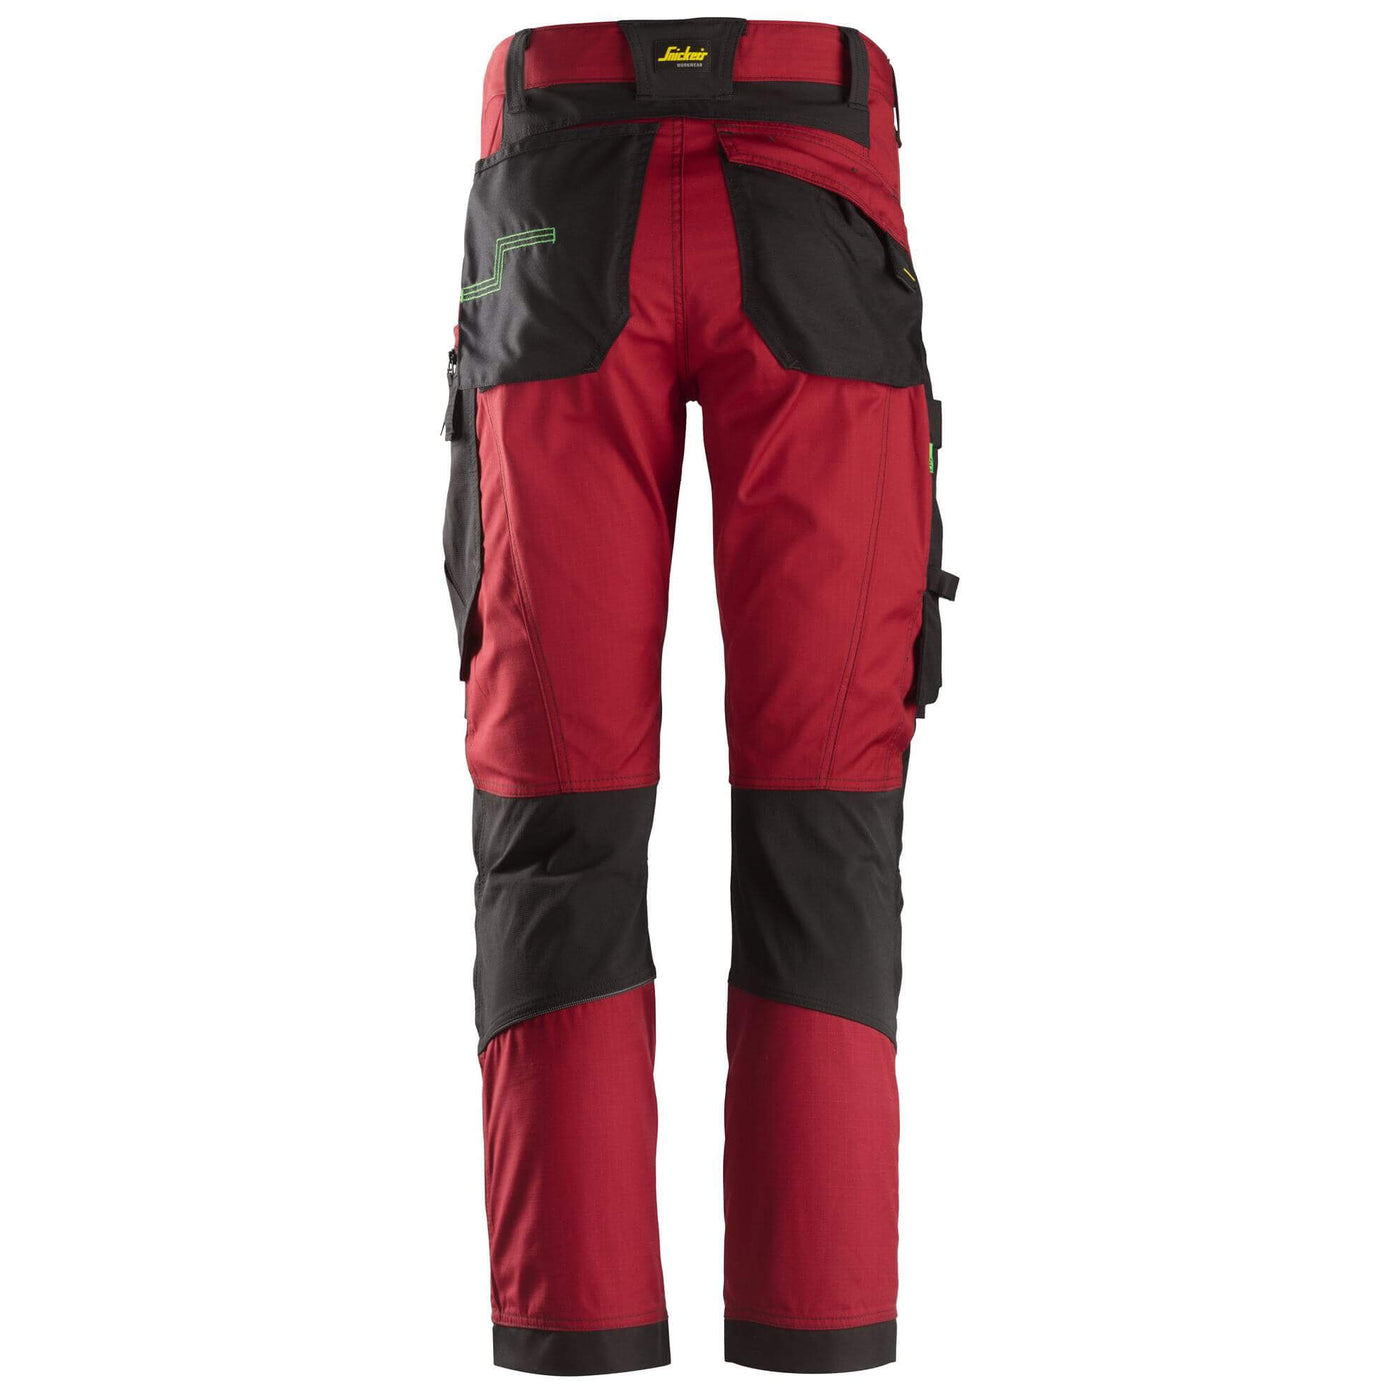 Snickers 6903 FlexiWork Lightweight Work Trousers Chili Red Black back #colour_chili-red-black